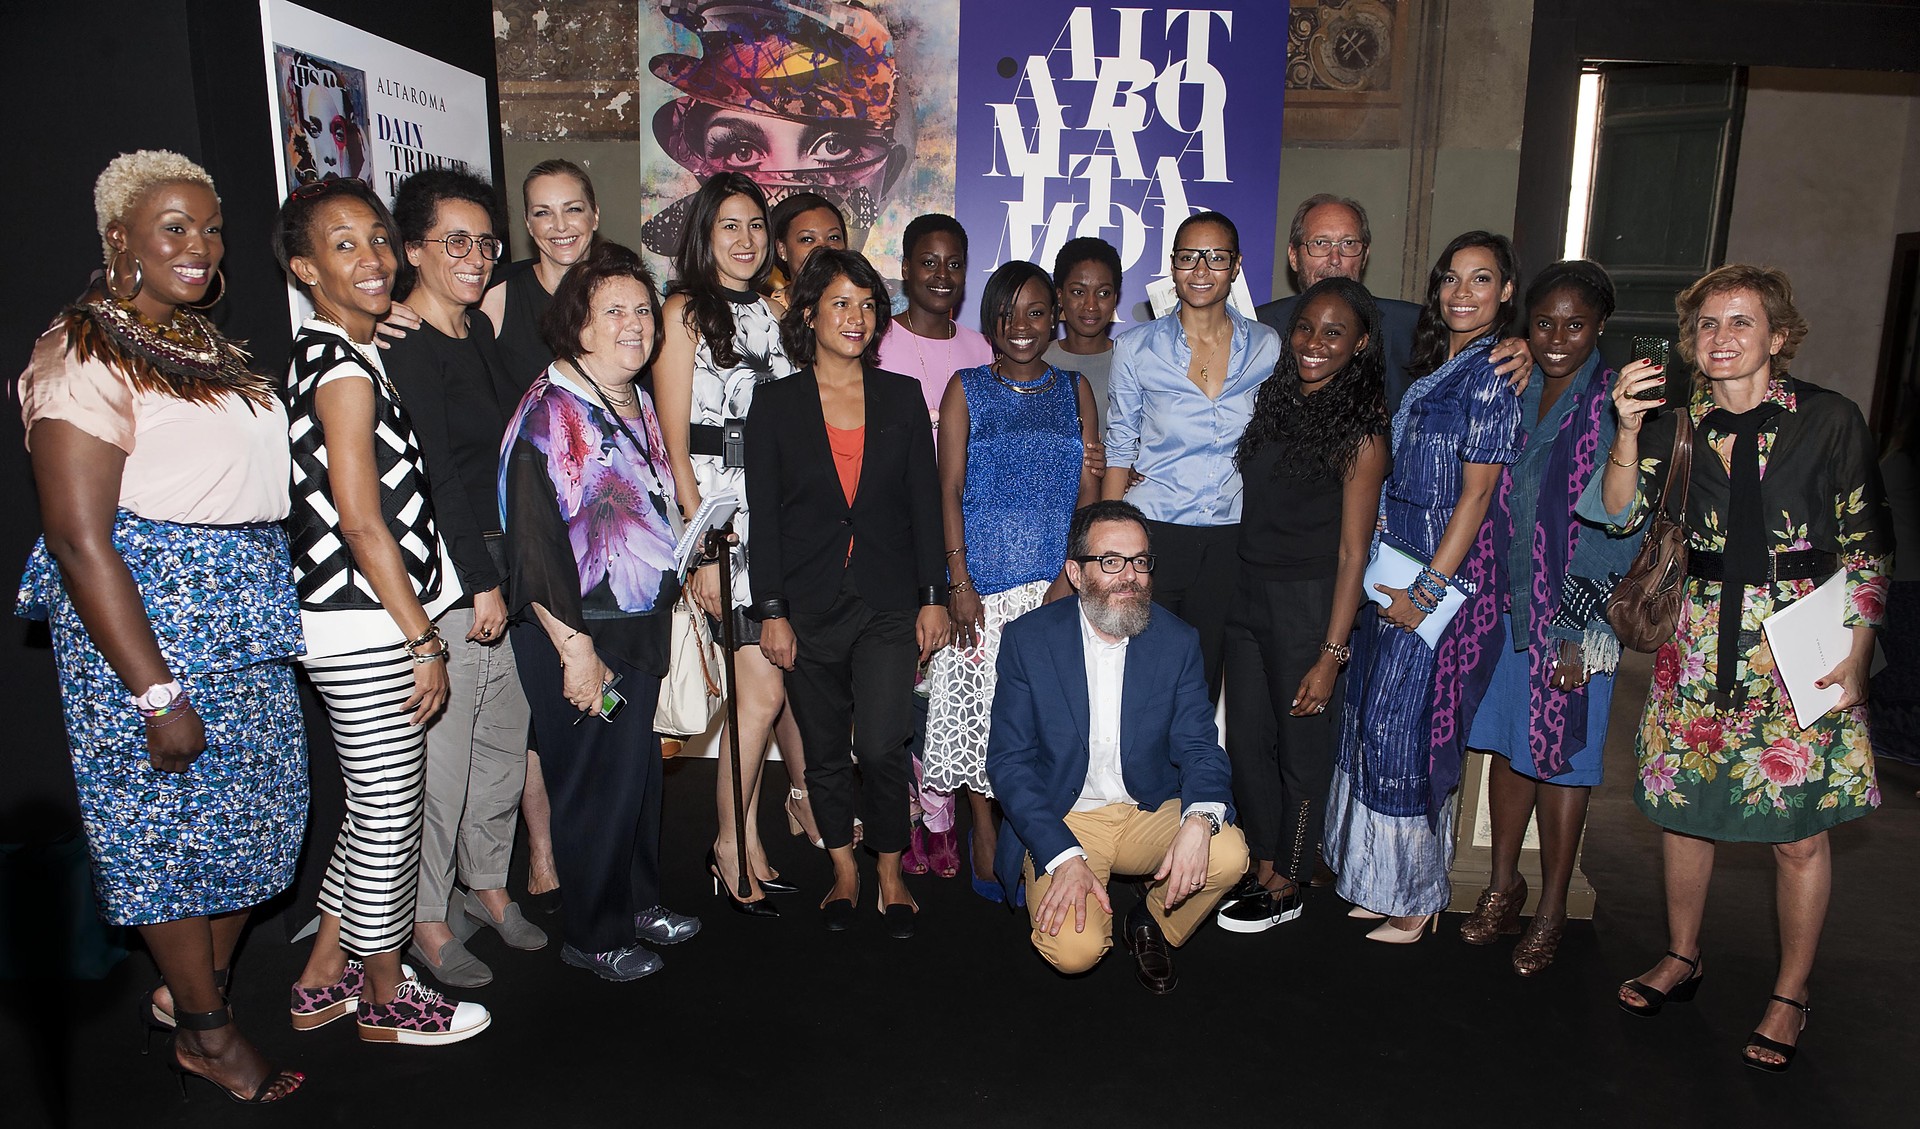 Suzy with Simone Cipriani (kneeling) and the ITC Ethical Fashion Initiative team after the Beat of Africa show at Altaroma (Foto:  )